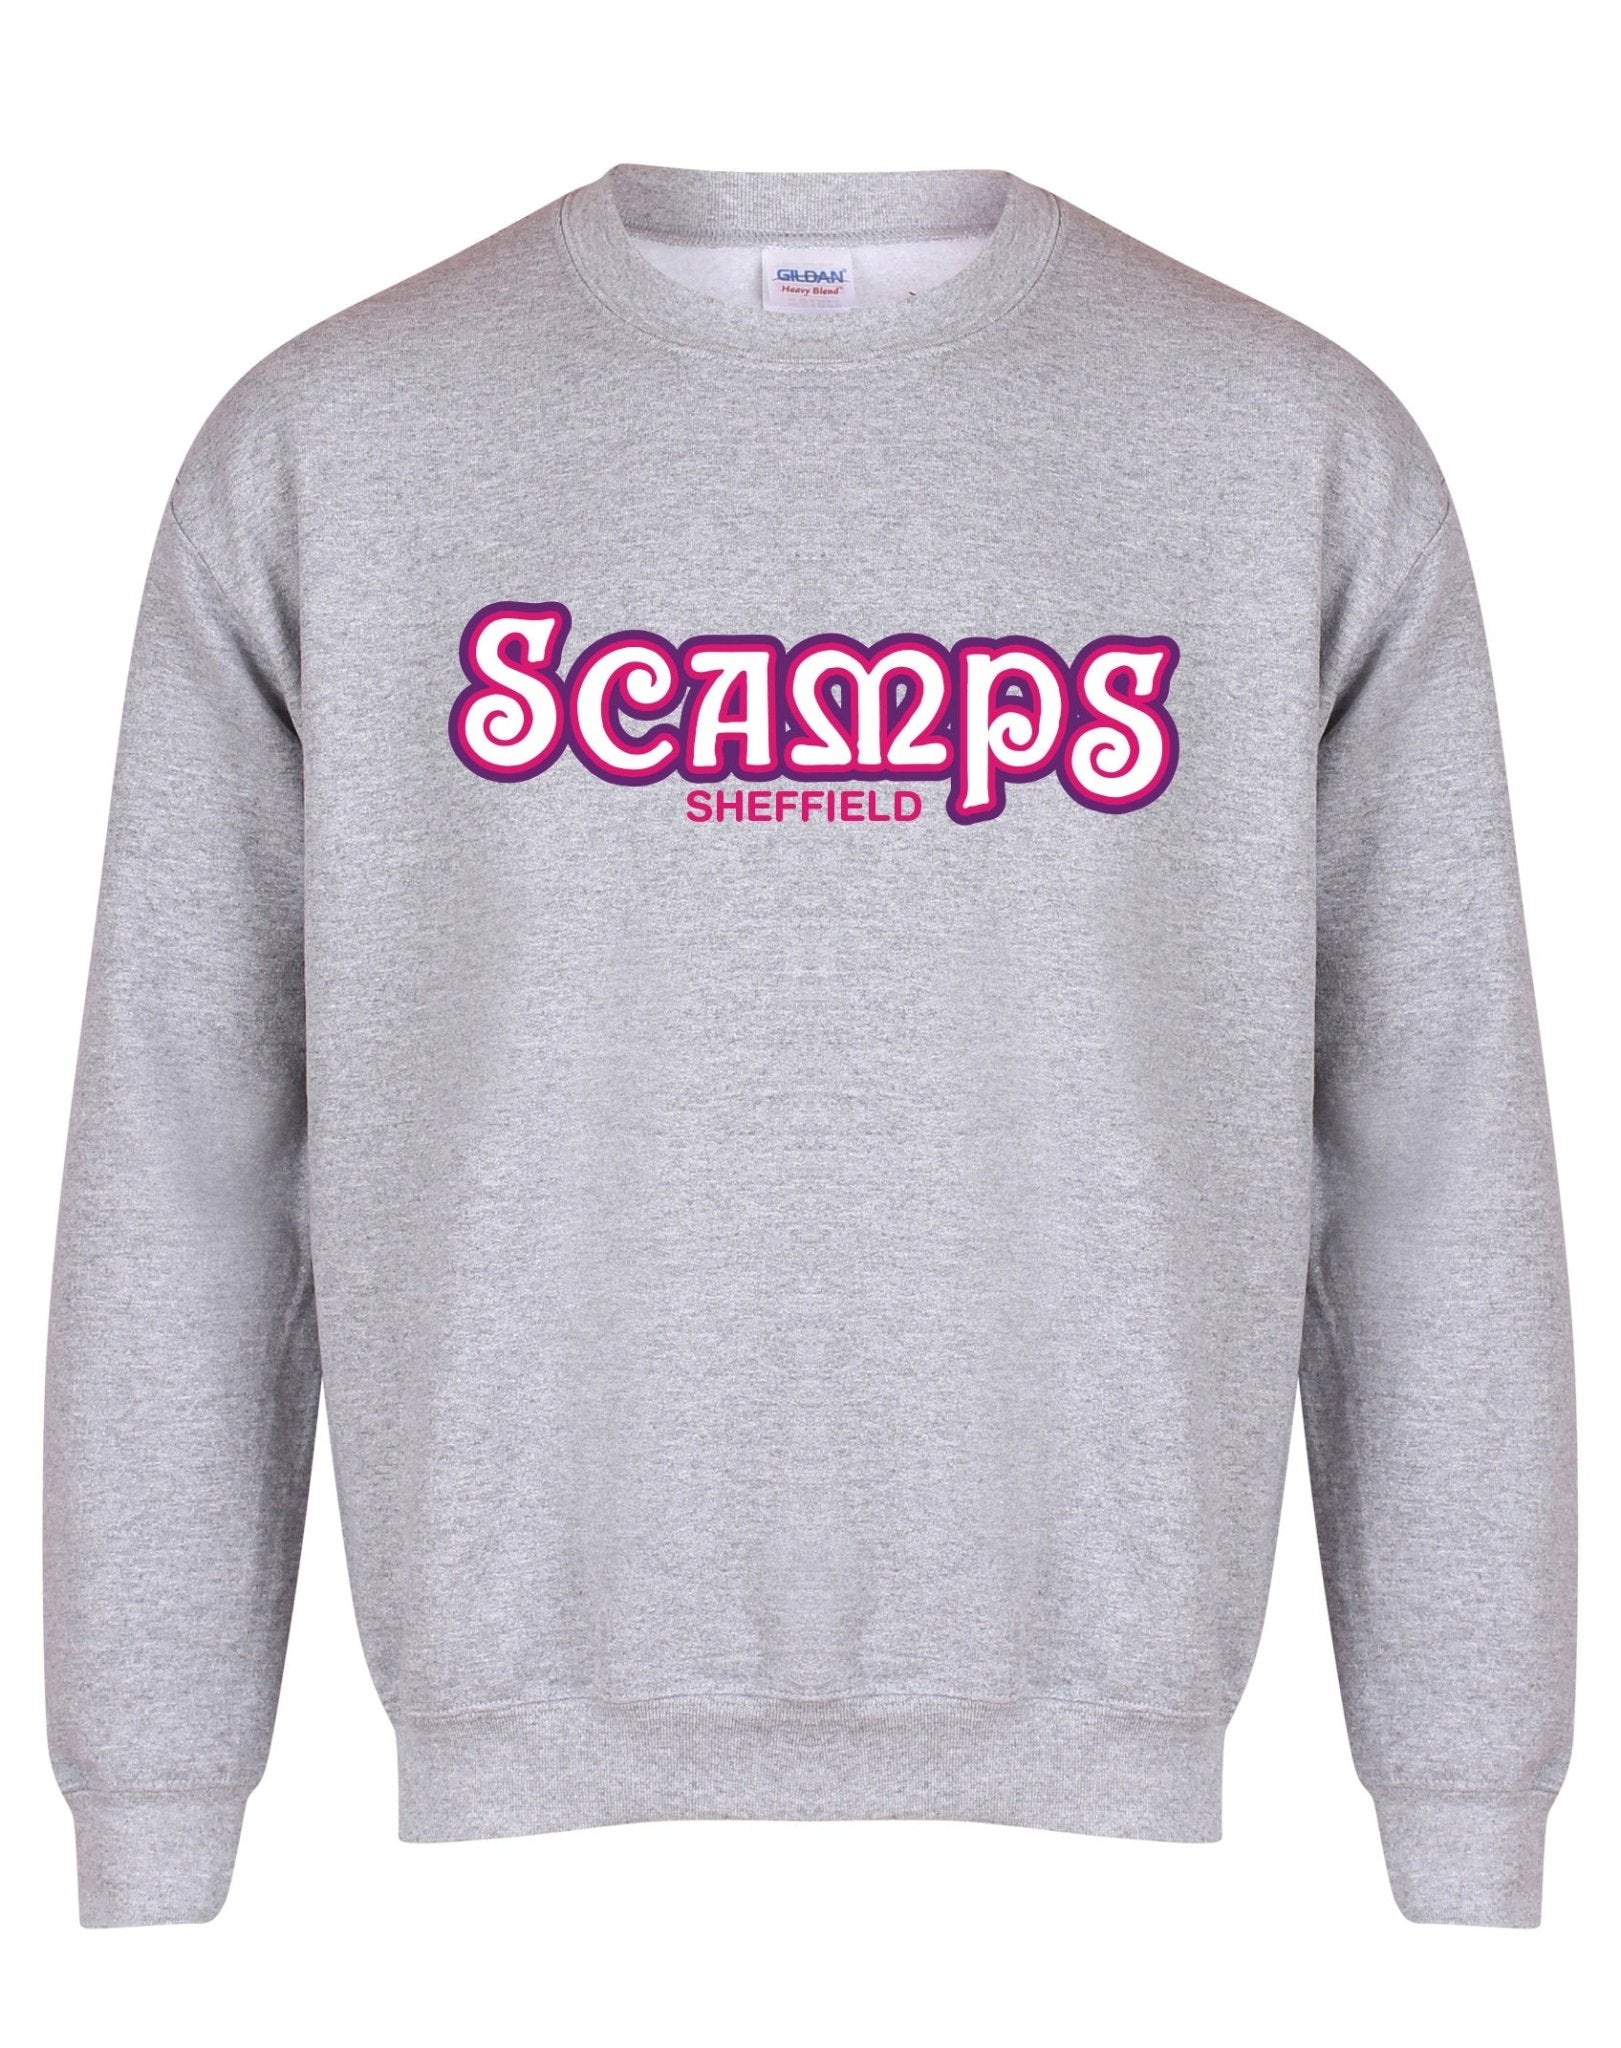 Scamps unisex sweatshirt - various colours - Dirty Stop Outs